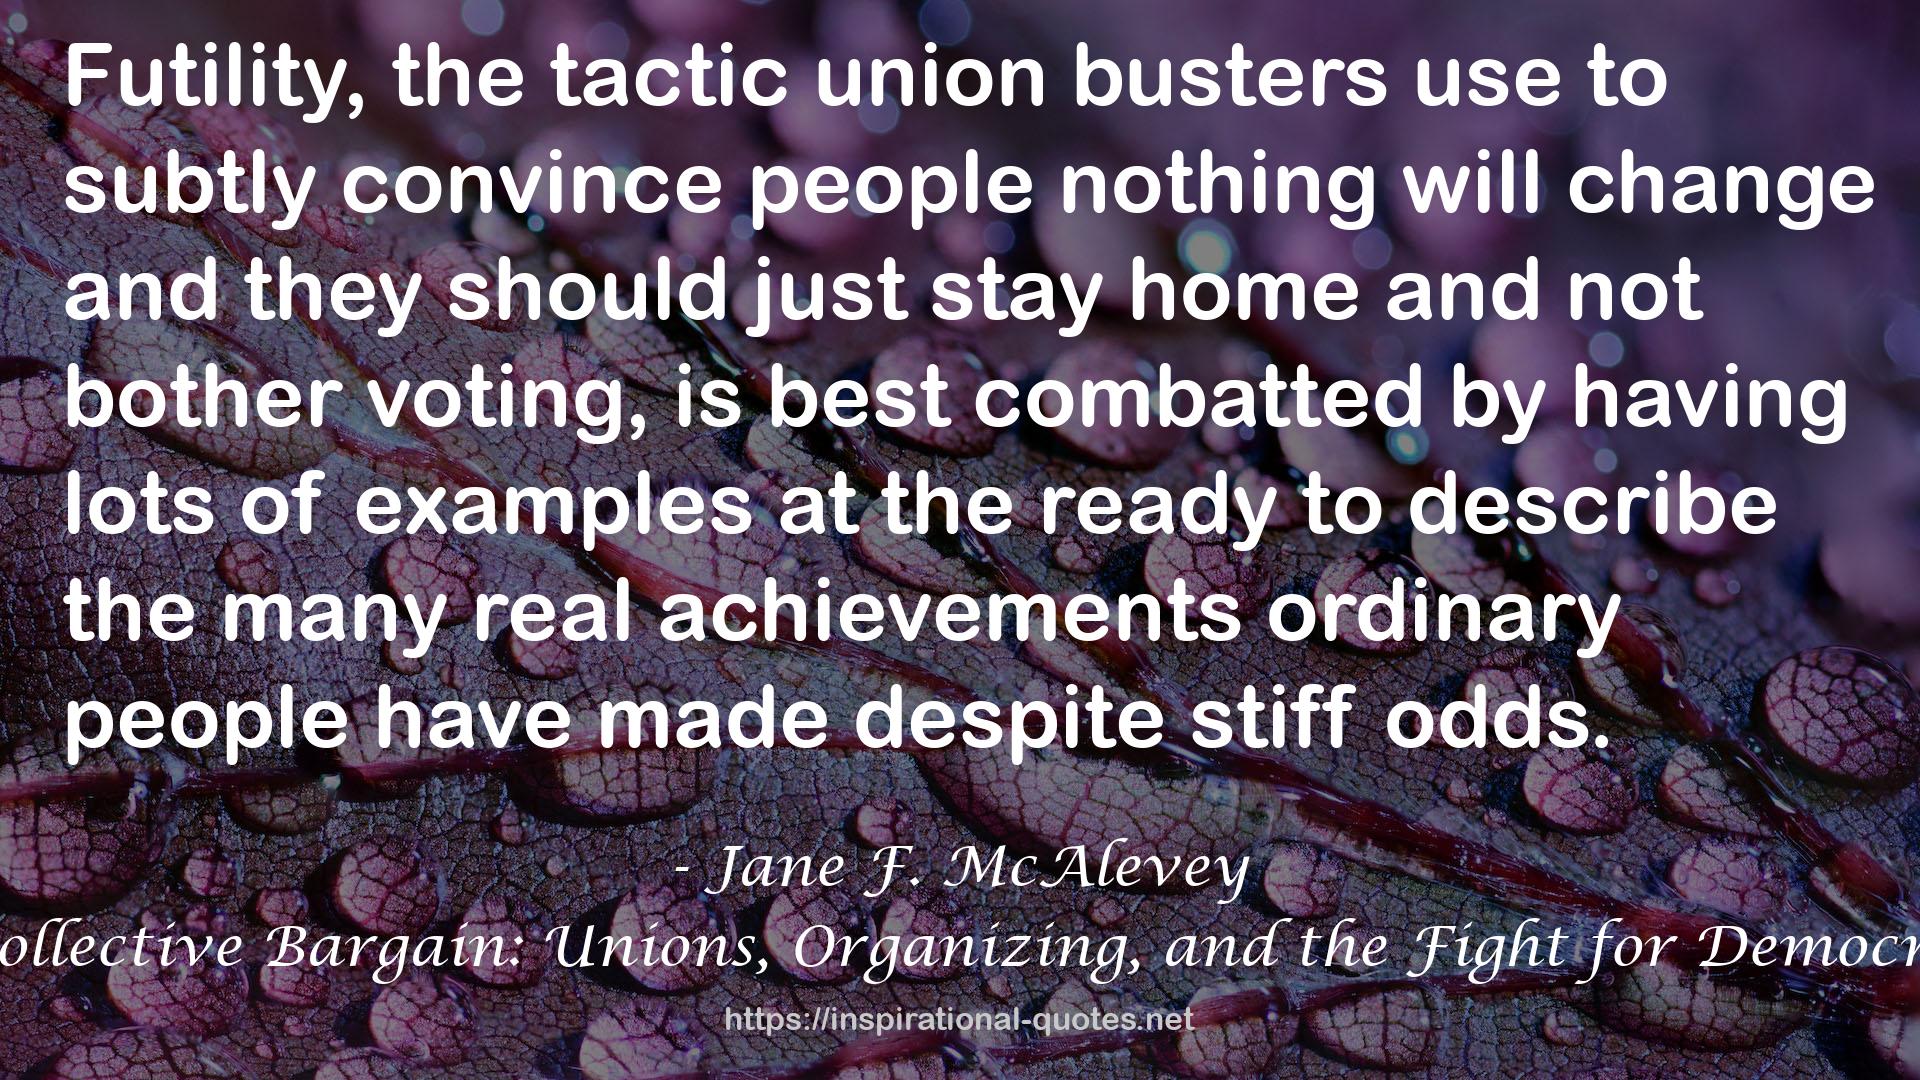 A Collective Bargain: Unions, Organizing, and the Fight for Democracy QUOTES